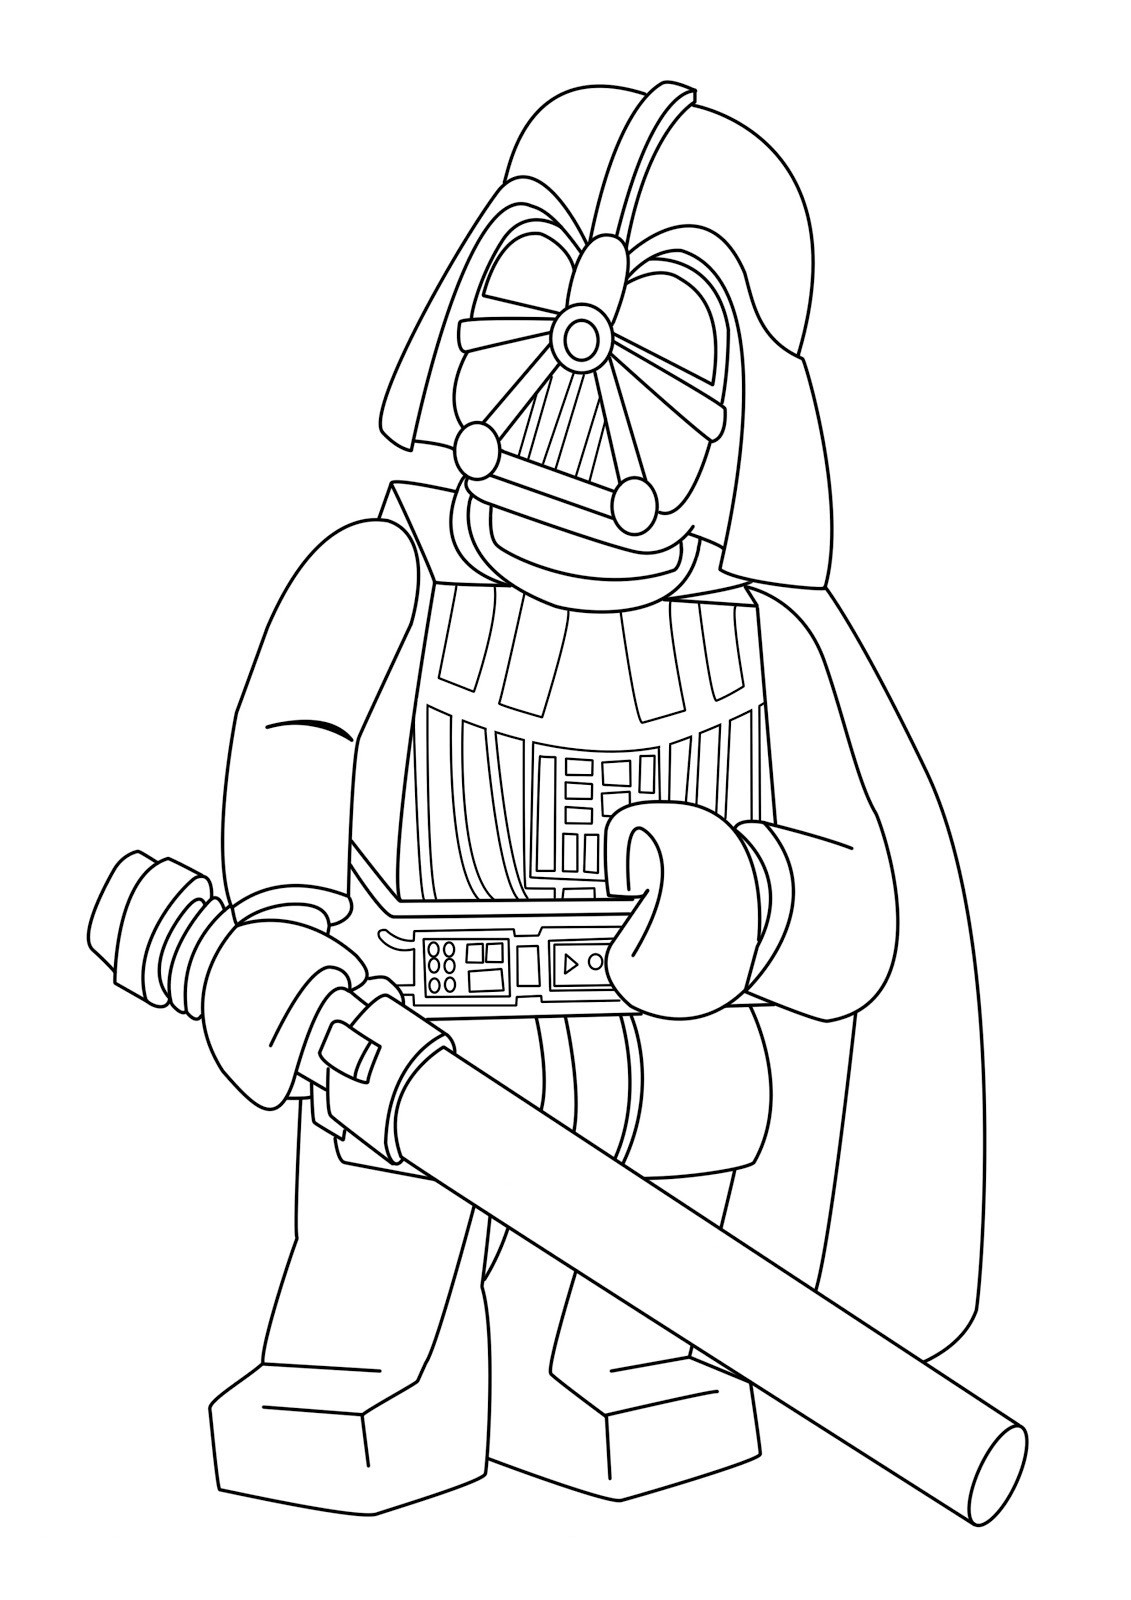 Coloring Pages For Boys Over 10
 Lego Star Wars coloring pages